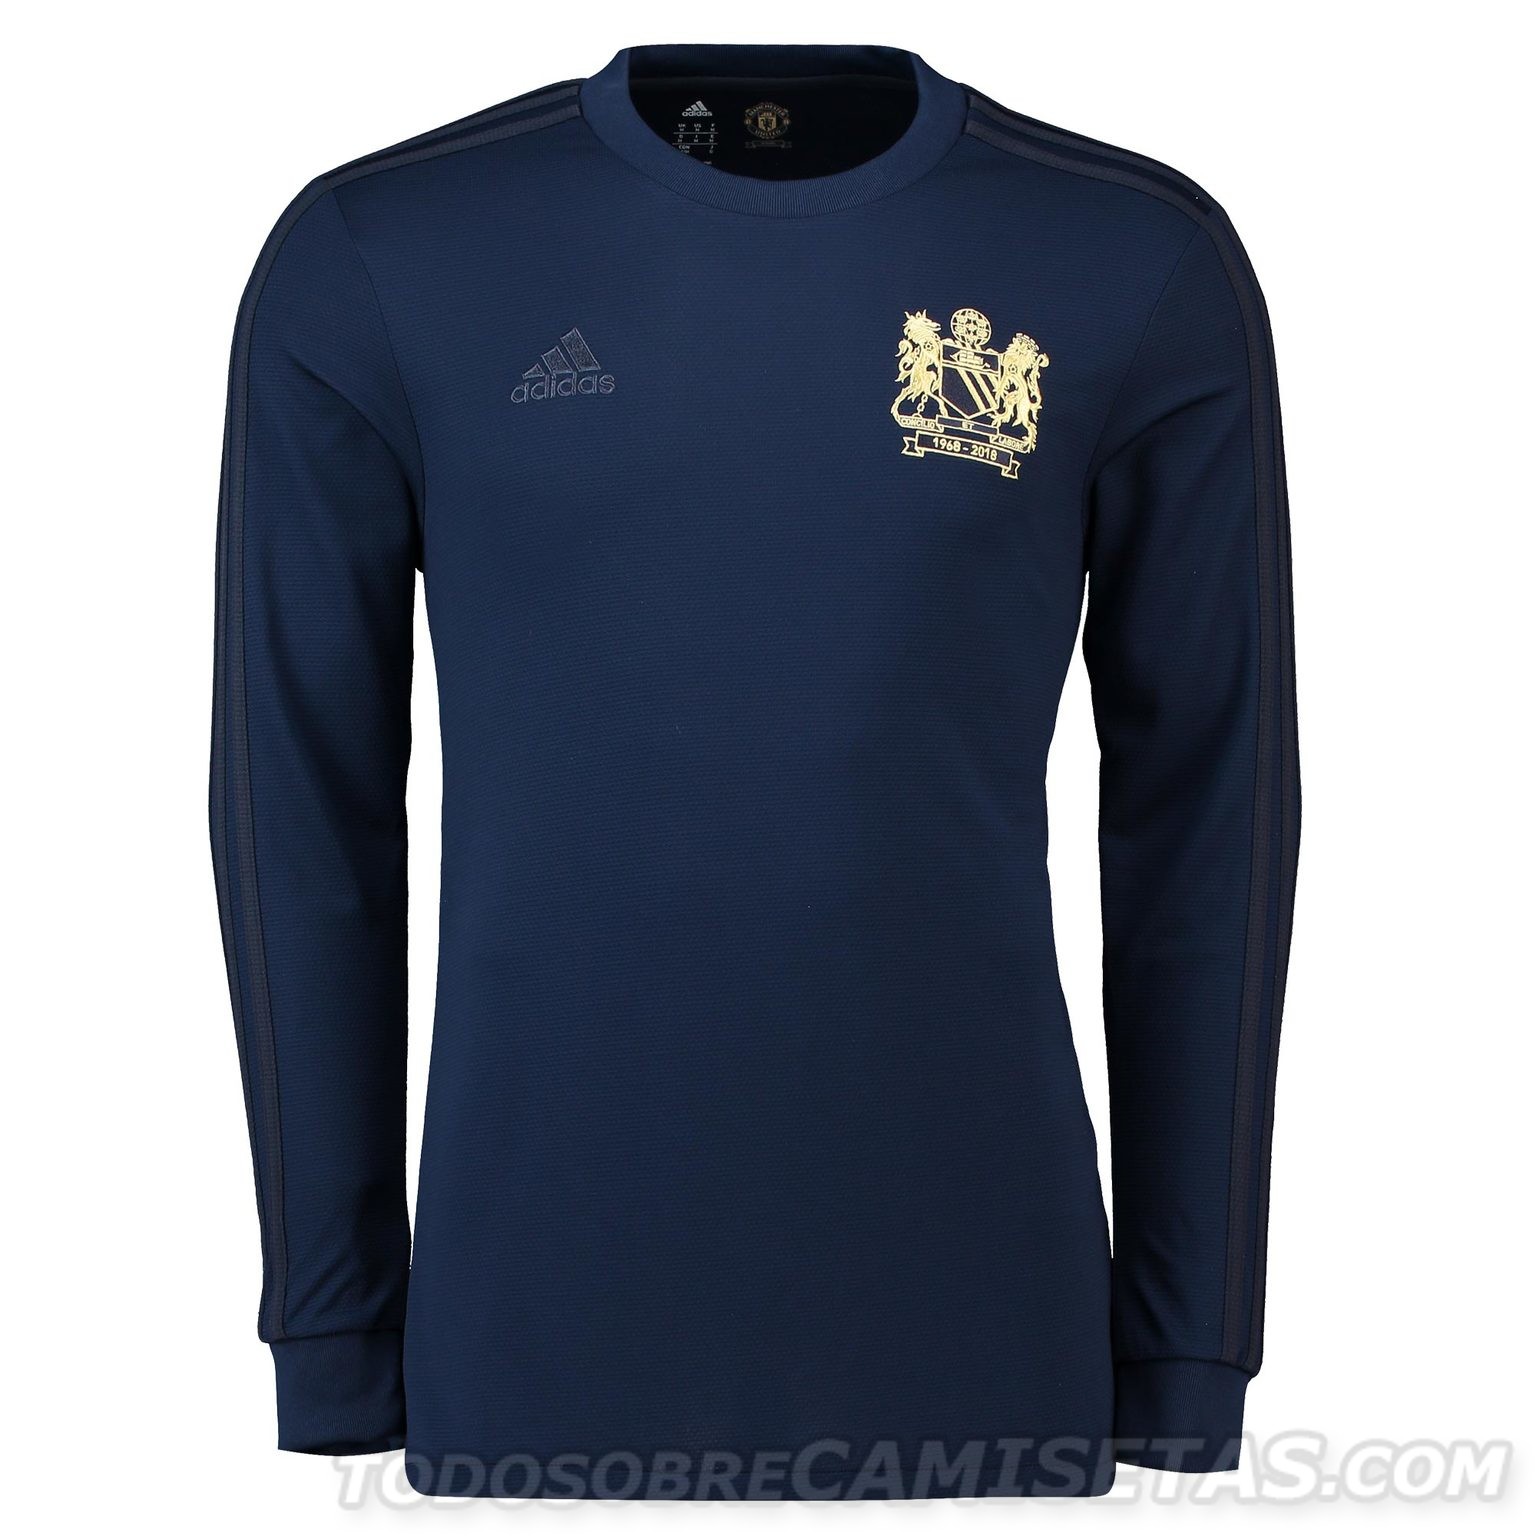 Manchester United adidas 1968 Special Edition Kit